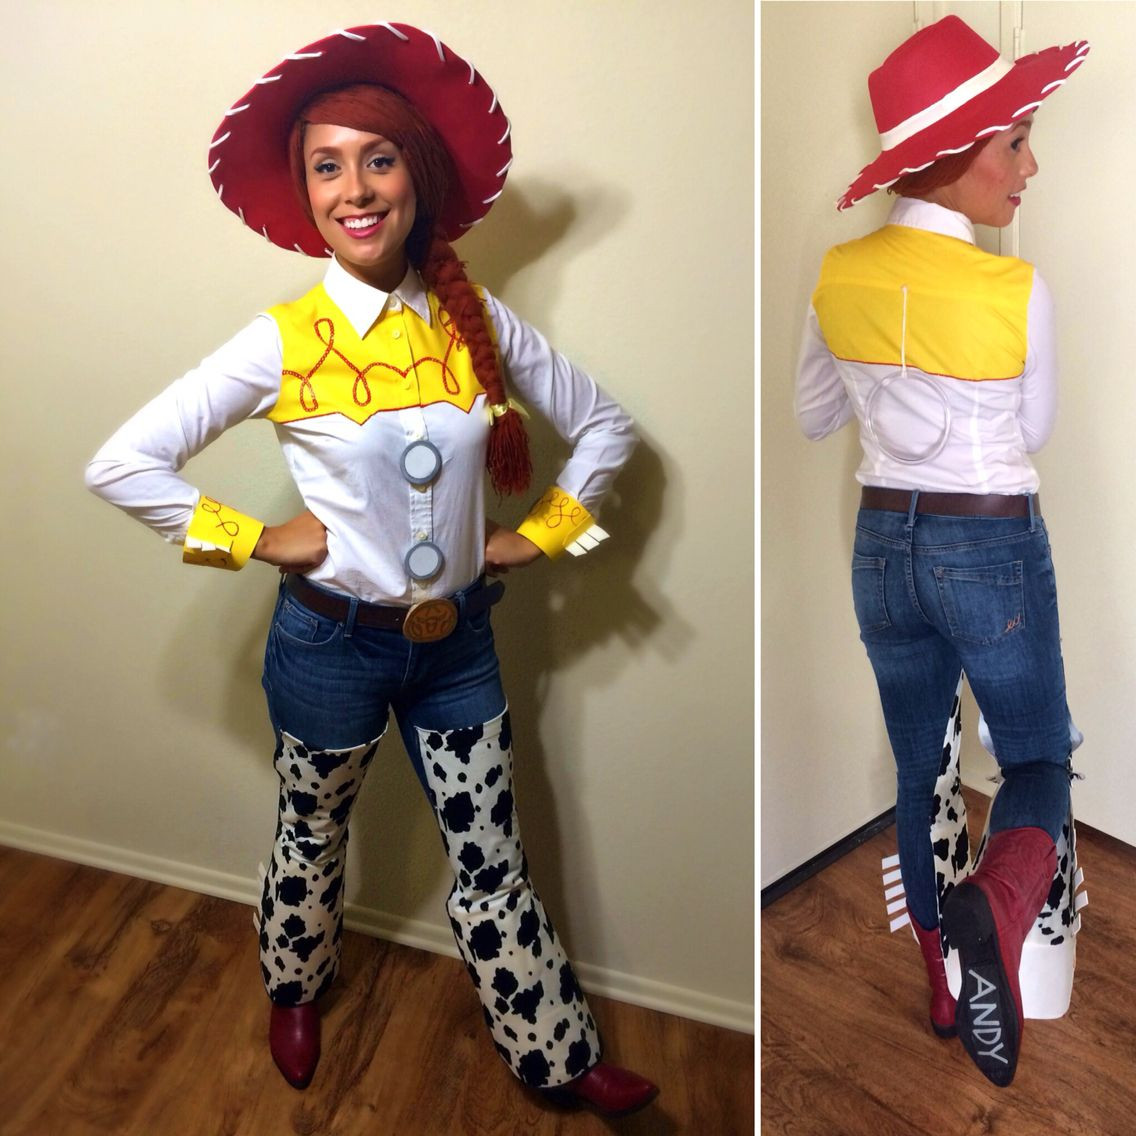 DIY Jessie Costume
 Went all out this year and made my own DIY Jessie The